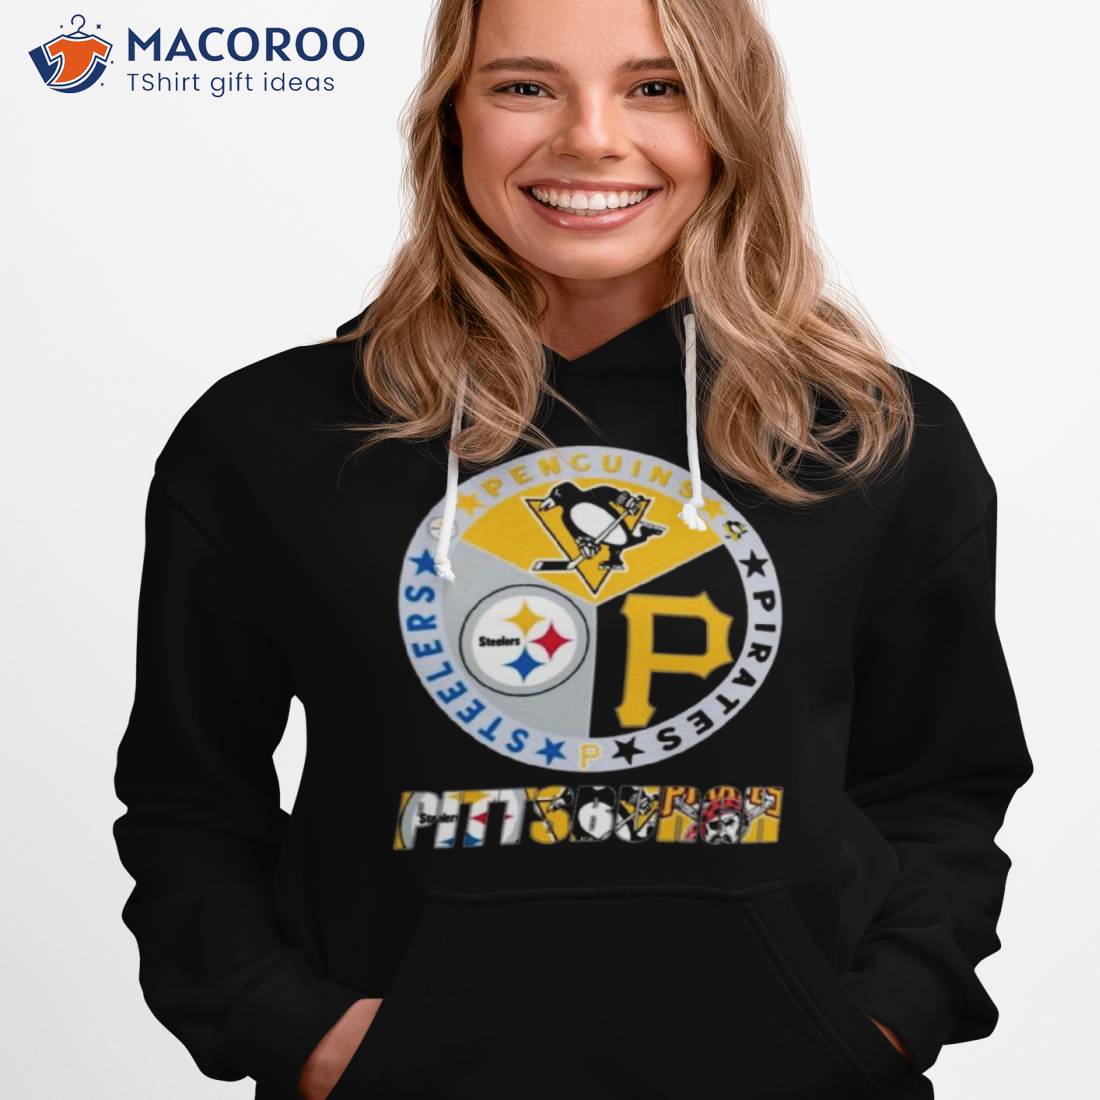 Official pittsburgh city of champions Steelers penguins pirates shirt,  hoodie, sweatshirt for men and women